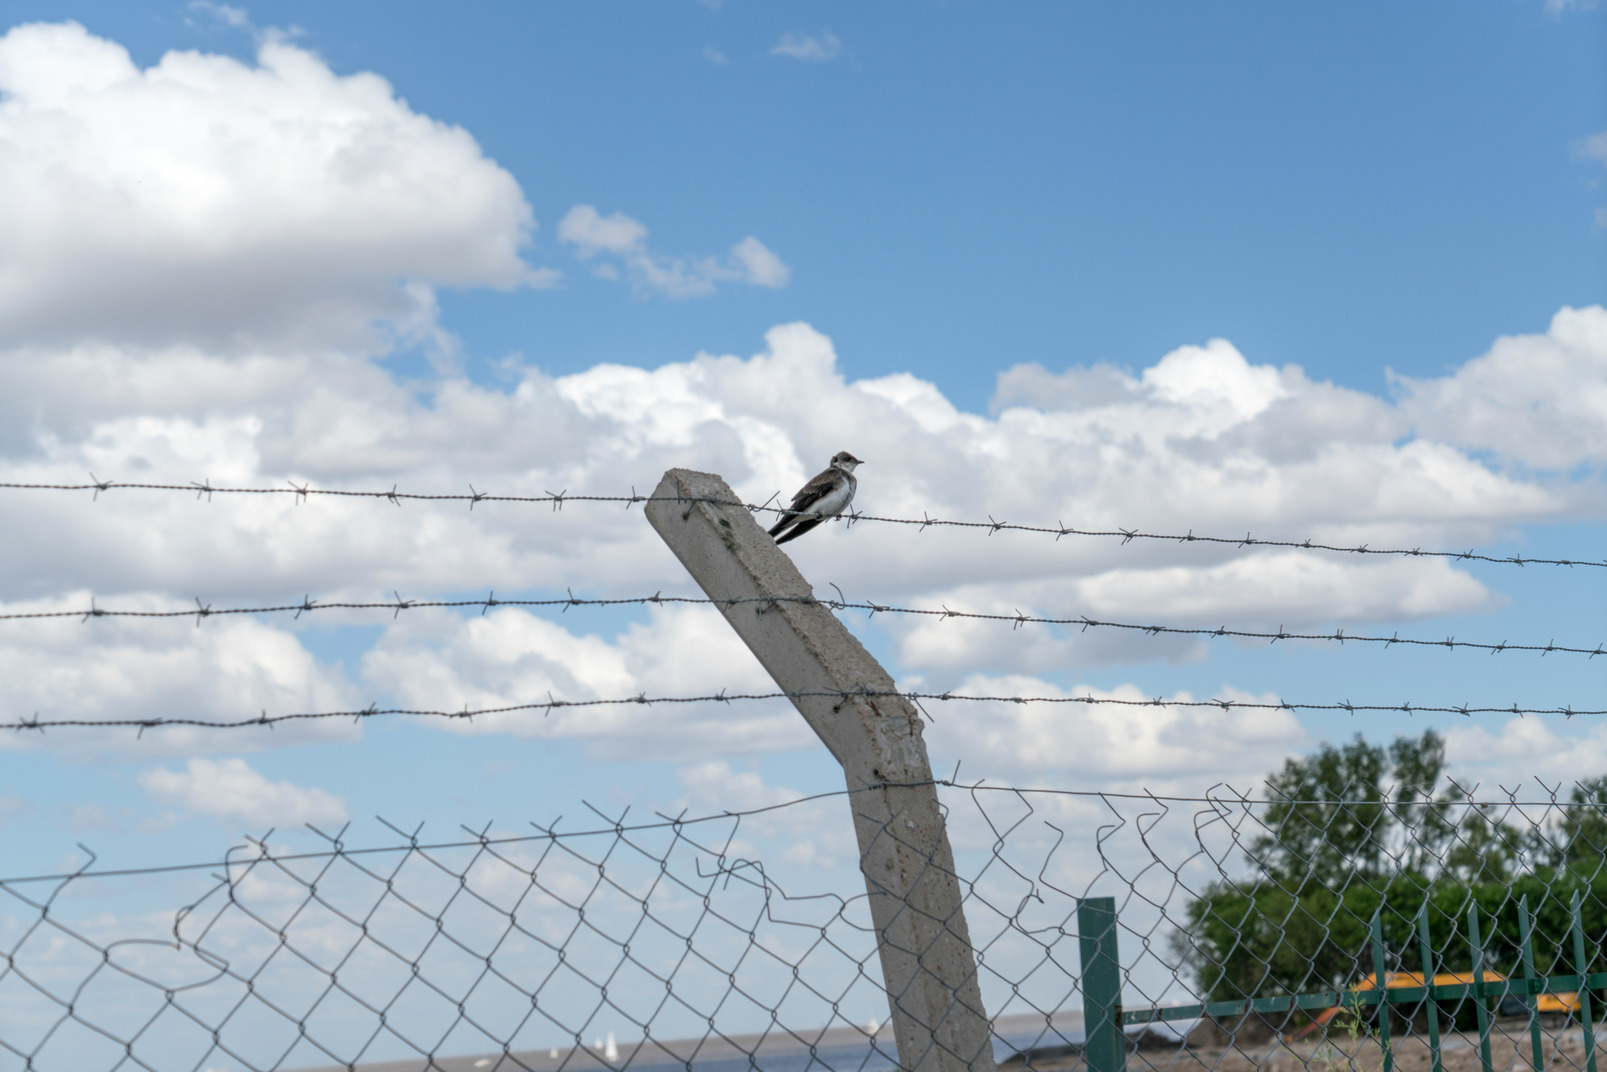 Bird sitting on the prickly fence